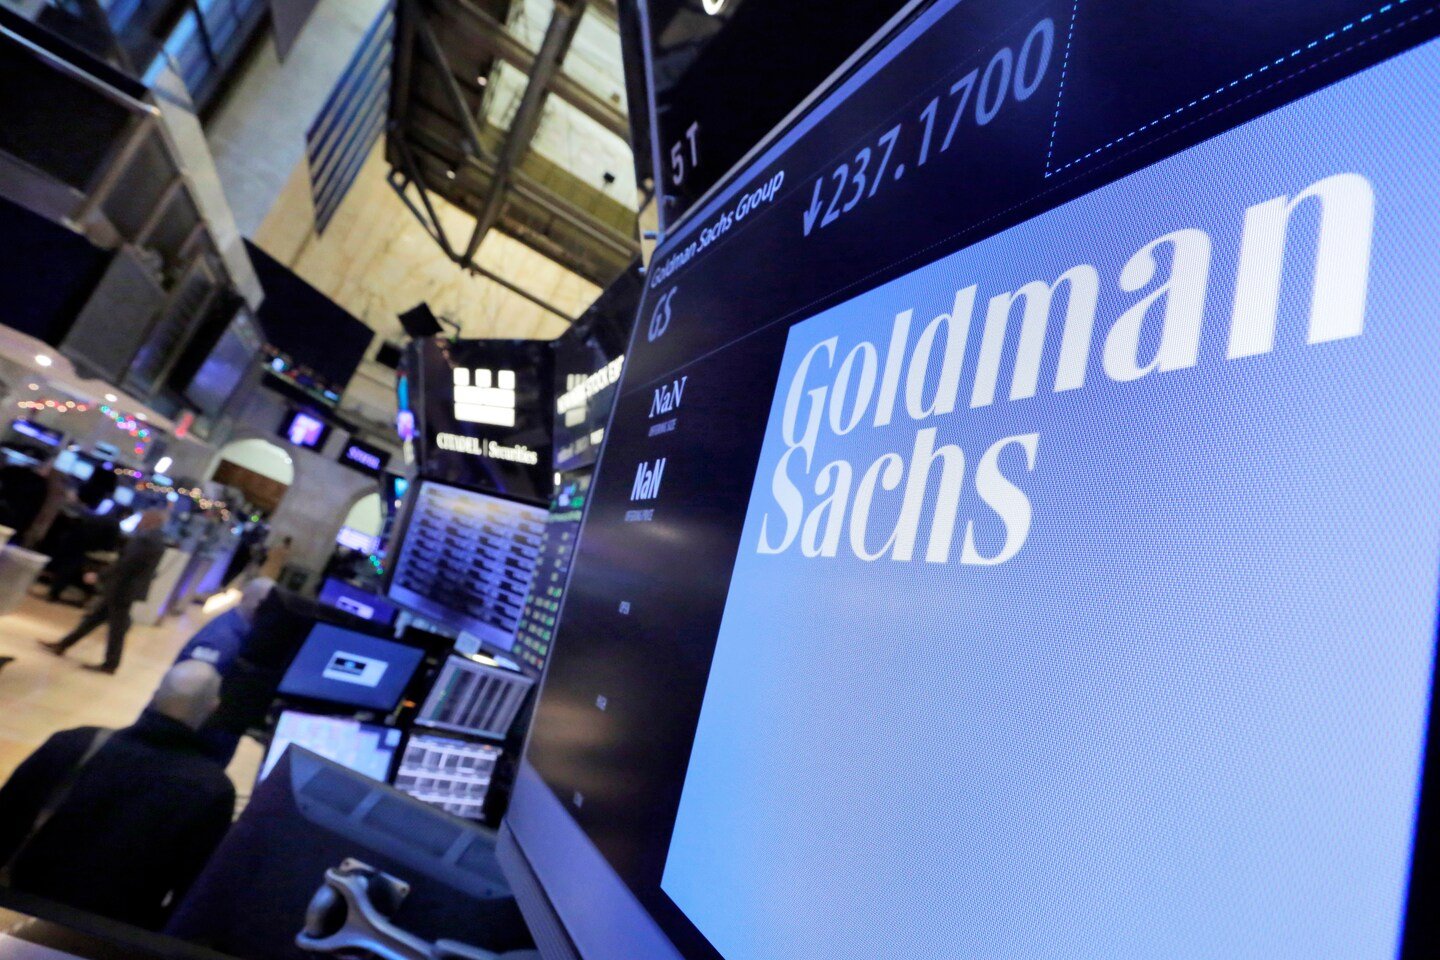 Goldman Sachs launches pronoun initiative, making it easier for employees to identify their gender